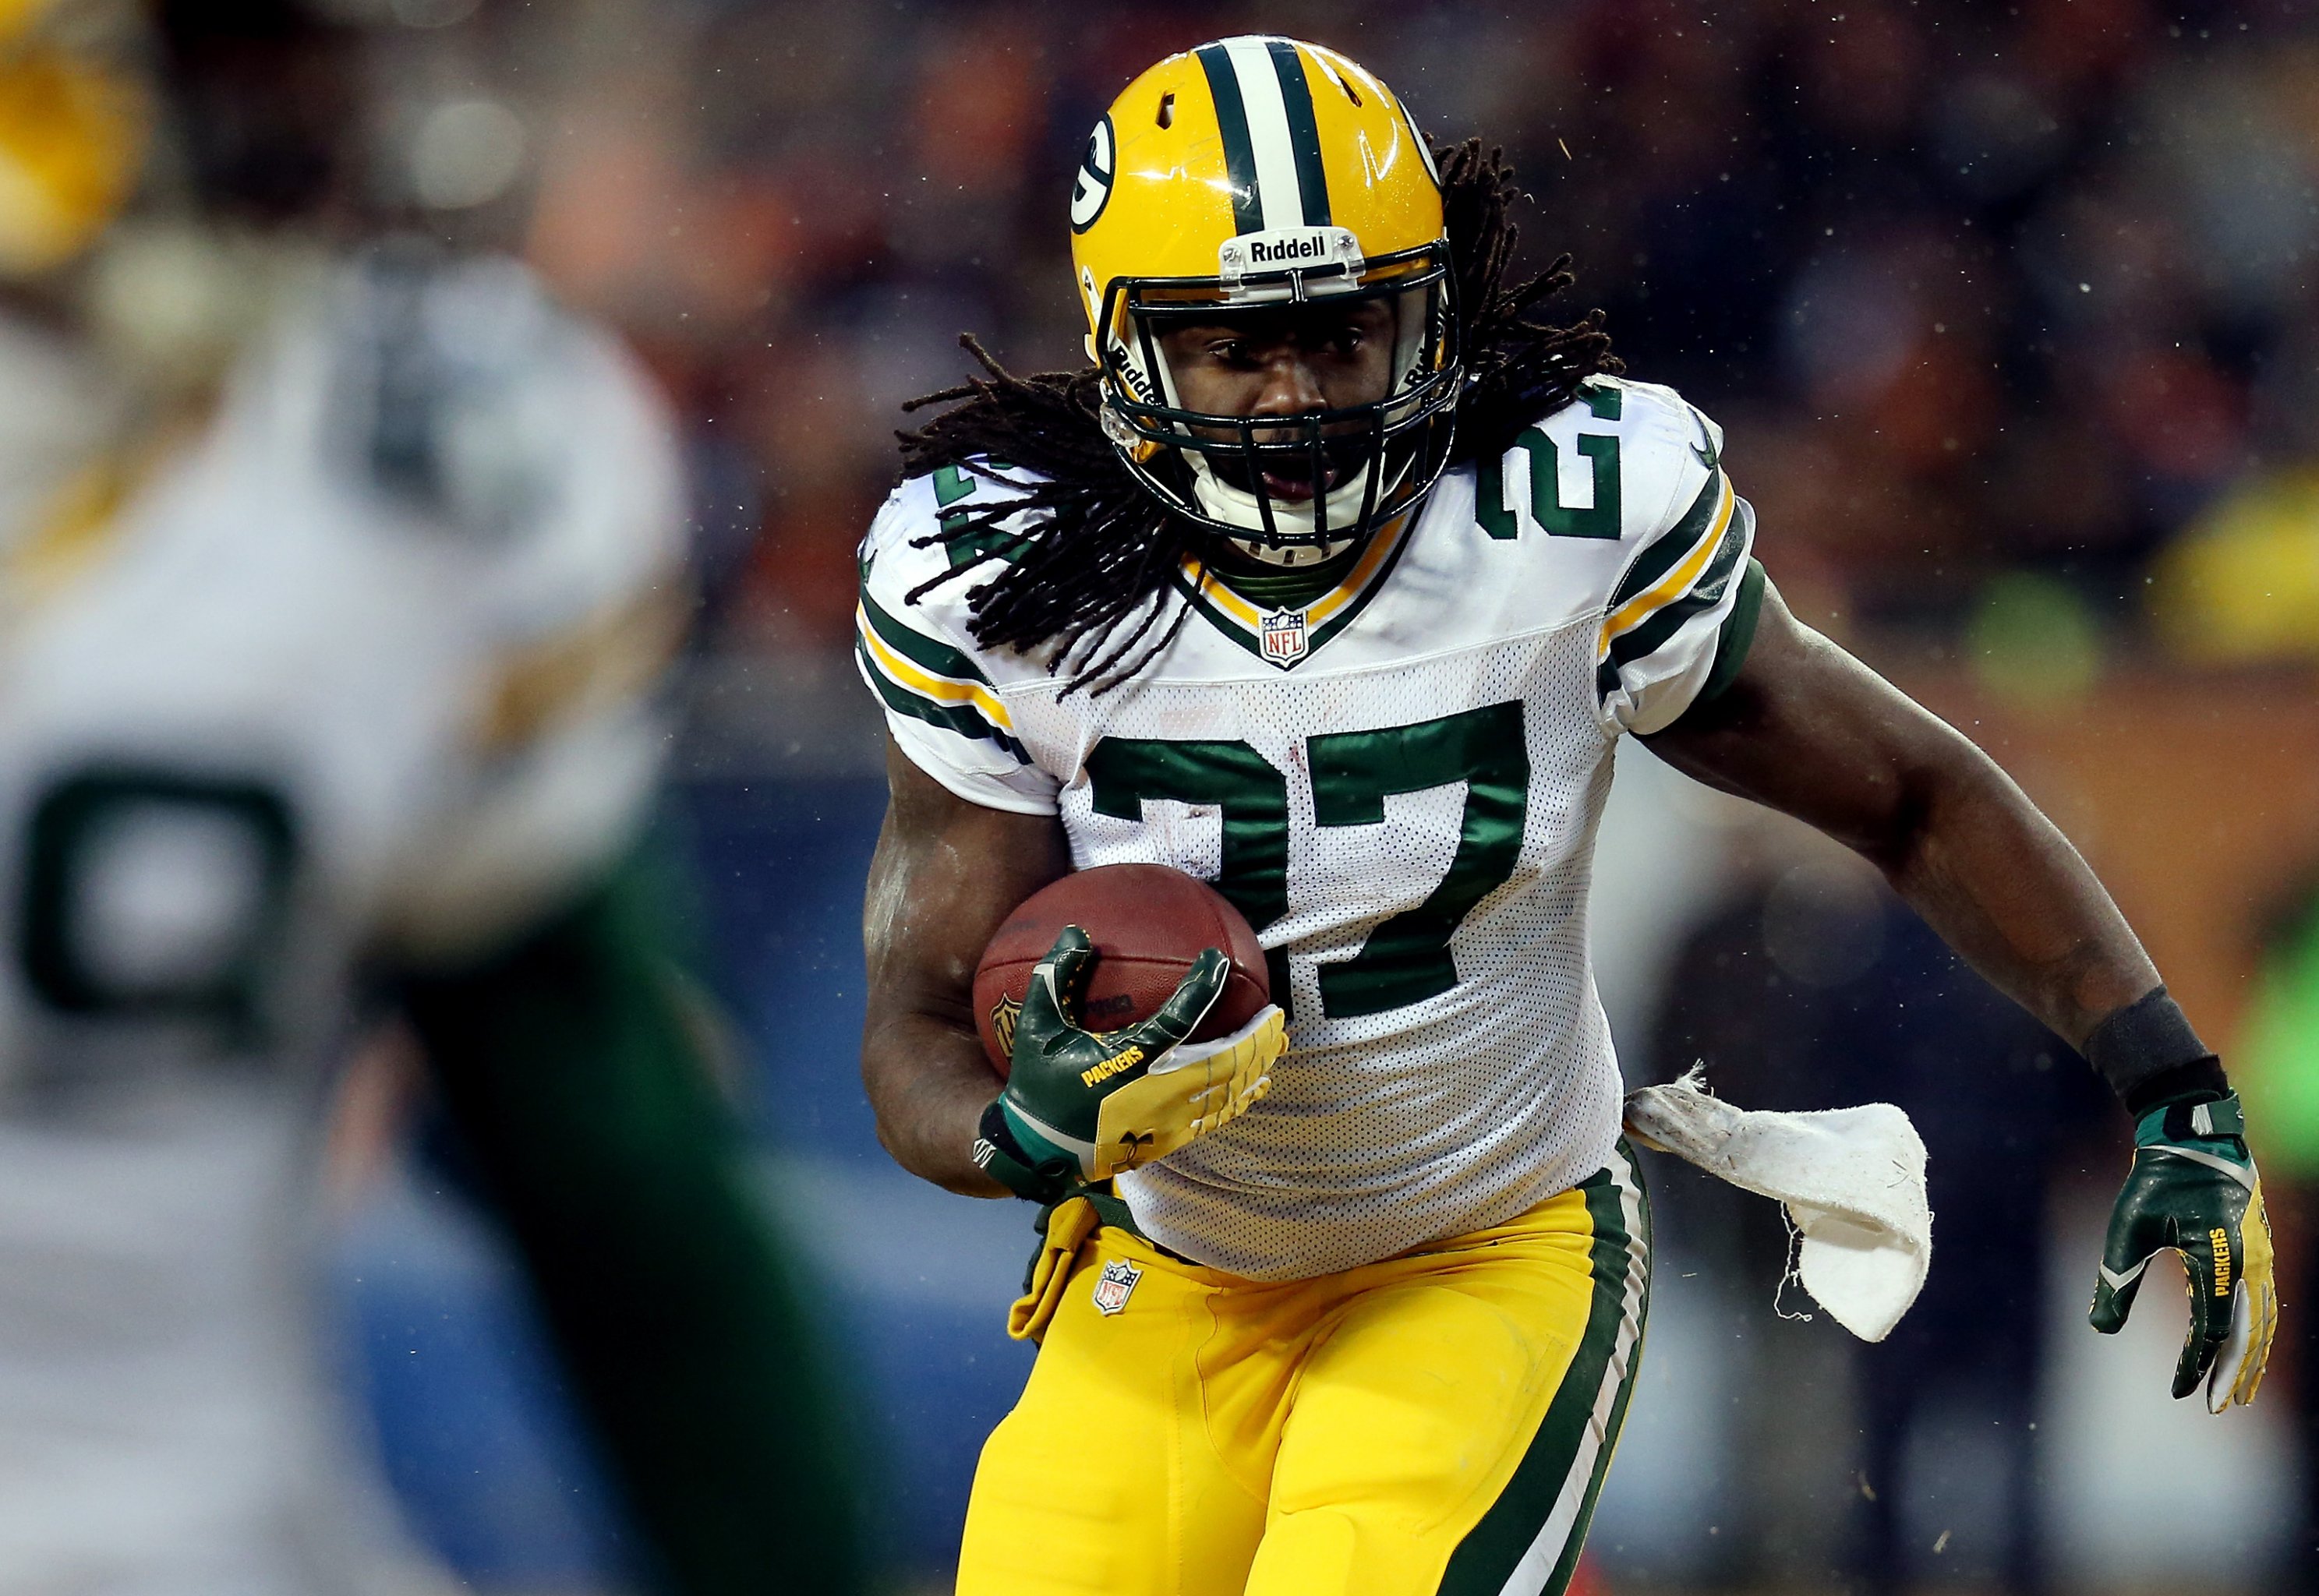 Sunday Night Football on NBC on X: Eddie Lacy's stats coming into